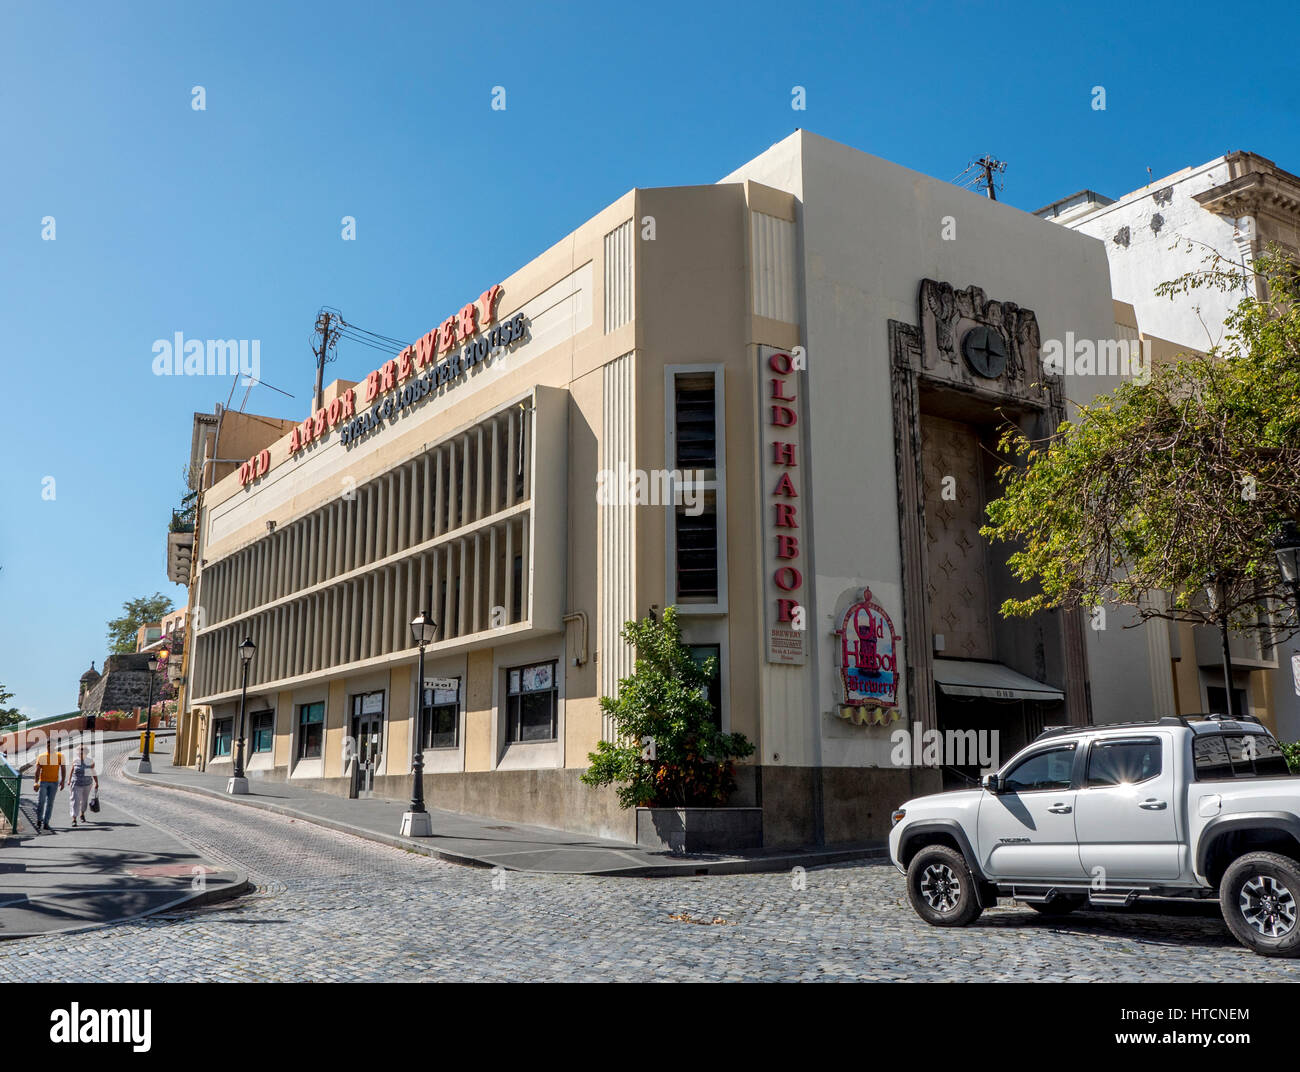 Old Harbor Brewery Steak And Lobster House Restaurant In Old San Juan Puerto Rico, Now Closed Down. Stock Photo